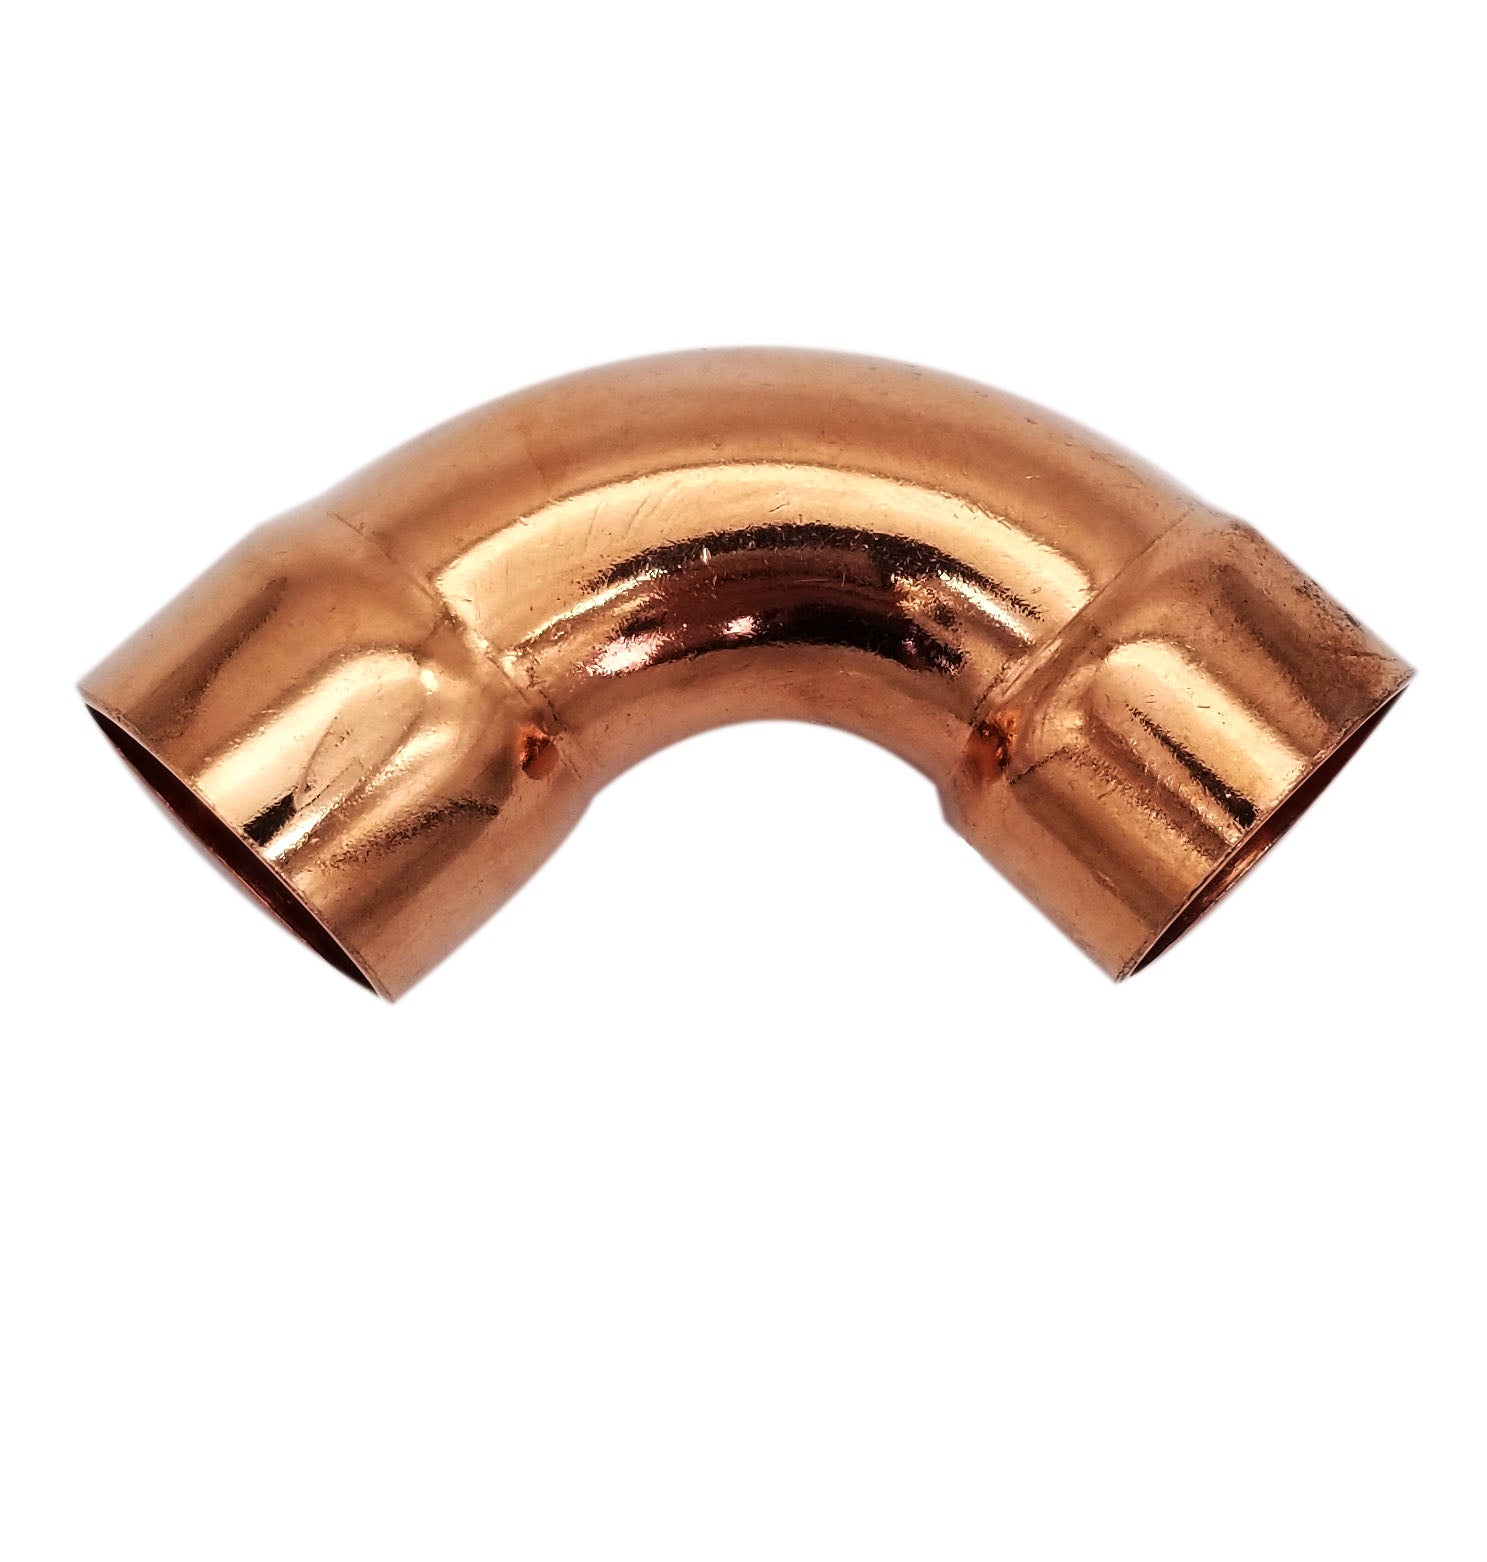 Copper Fitting 1 Inch (HVAC Outer Dimension) 7/8 Inch (Plumbing Inner Dimension) - Copper Long Radius 90° Elbow Fitting with 2 Solder Cups & HVAC – 99.9% Pure Copper - 5 Pack